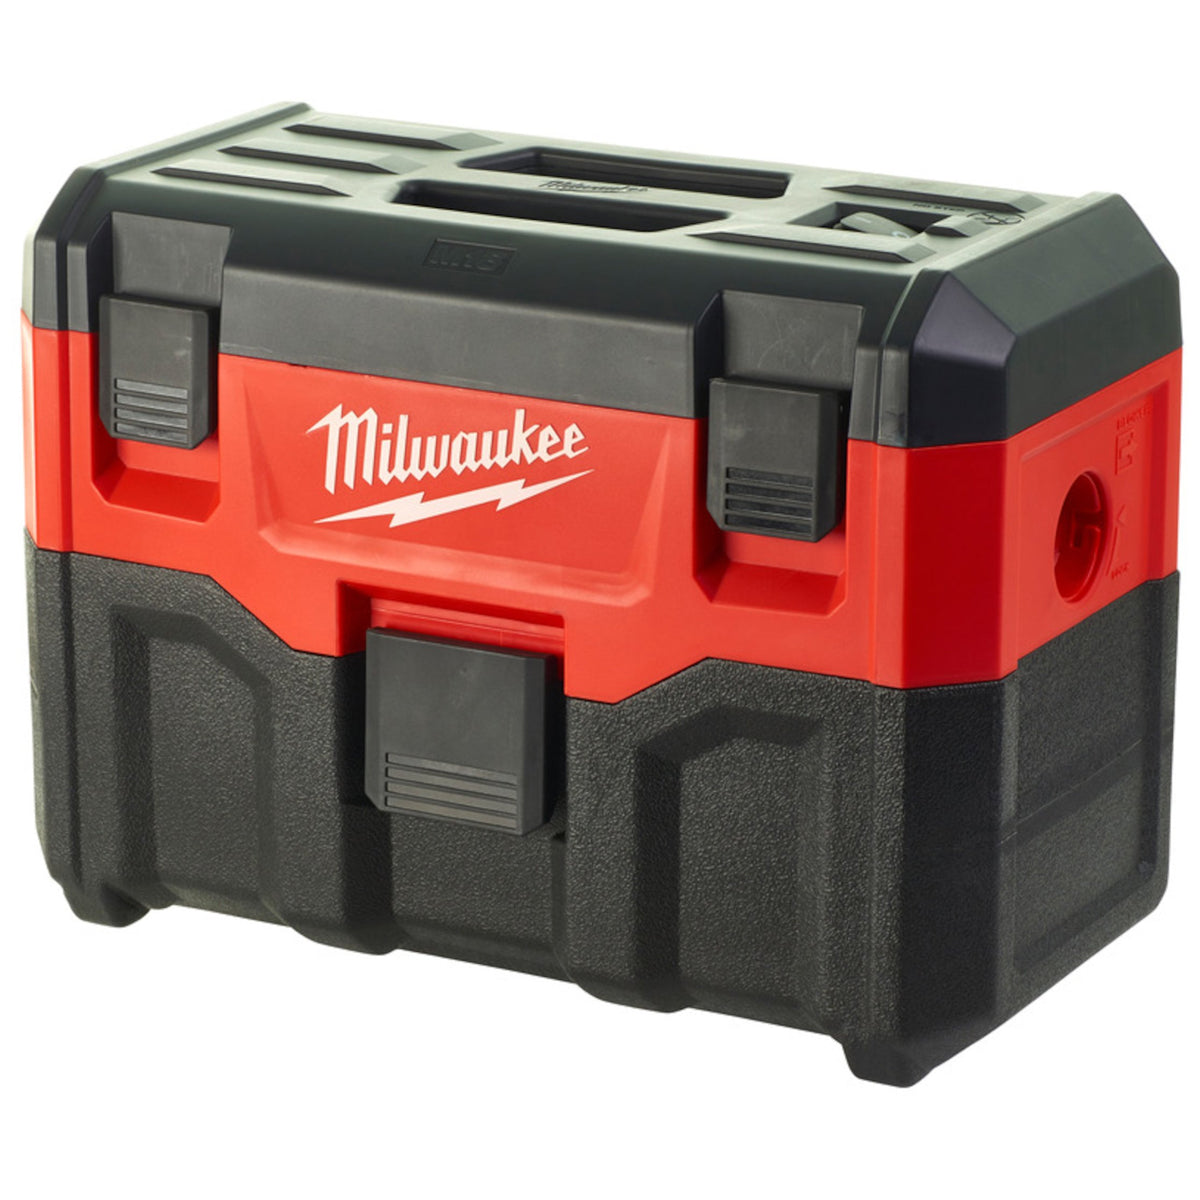 Milwaukee M18VC2-0 18V Wet Dry Vacuum 2nd Generation with 1 x 5.0Ah Battery & Charger